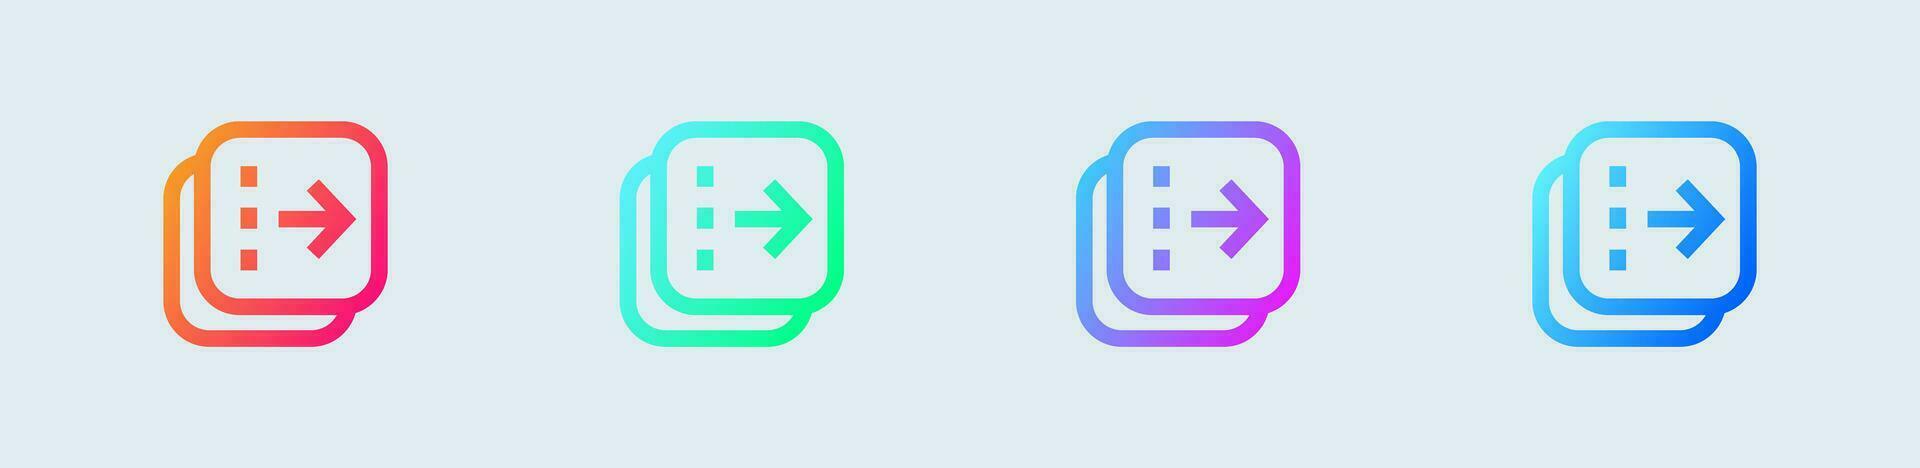 Flip line icon in gradient colors. Arrow switch signs vector illustration.